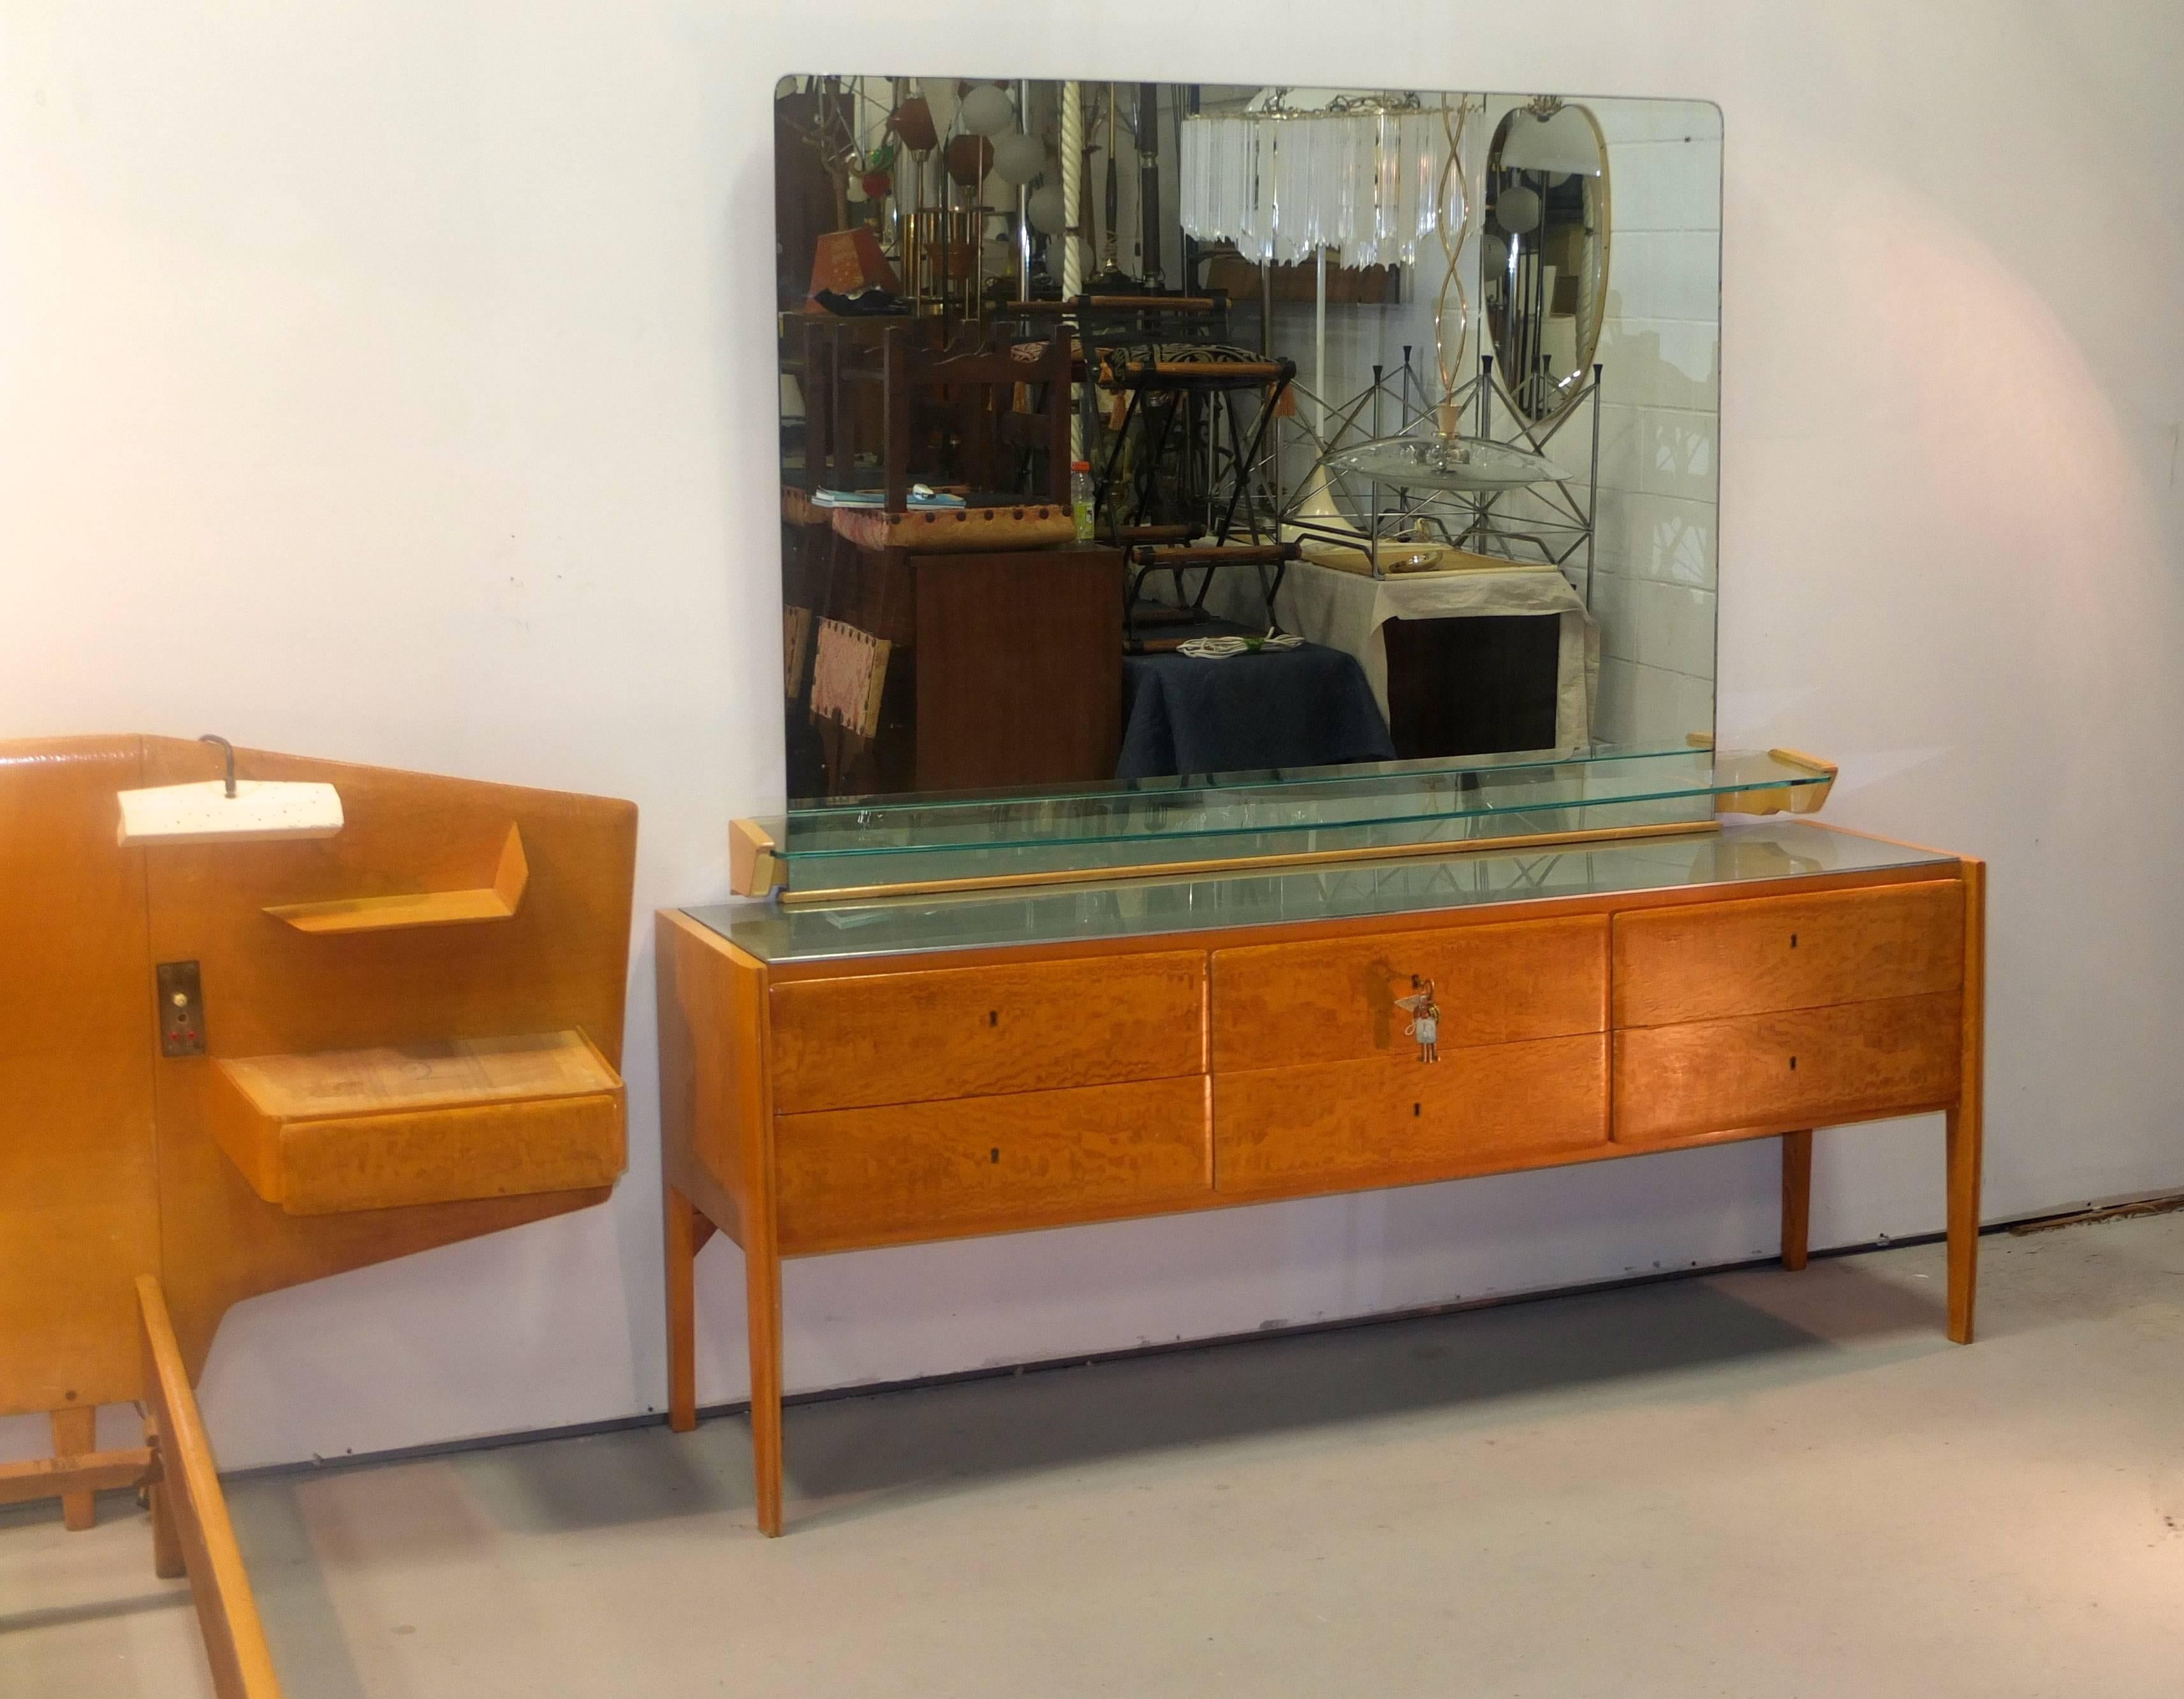 Gio Ponti long cabinet of six drawers standing on four legs which themselves are integral to the case. Dresser has silvered reverse painted glass top and is surmounted with a large rectangular mirror and a floating glass shelf cut in Ponti's